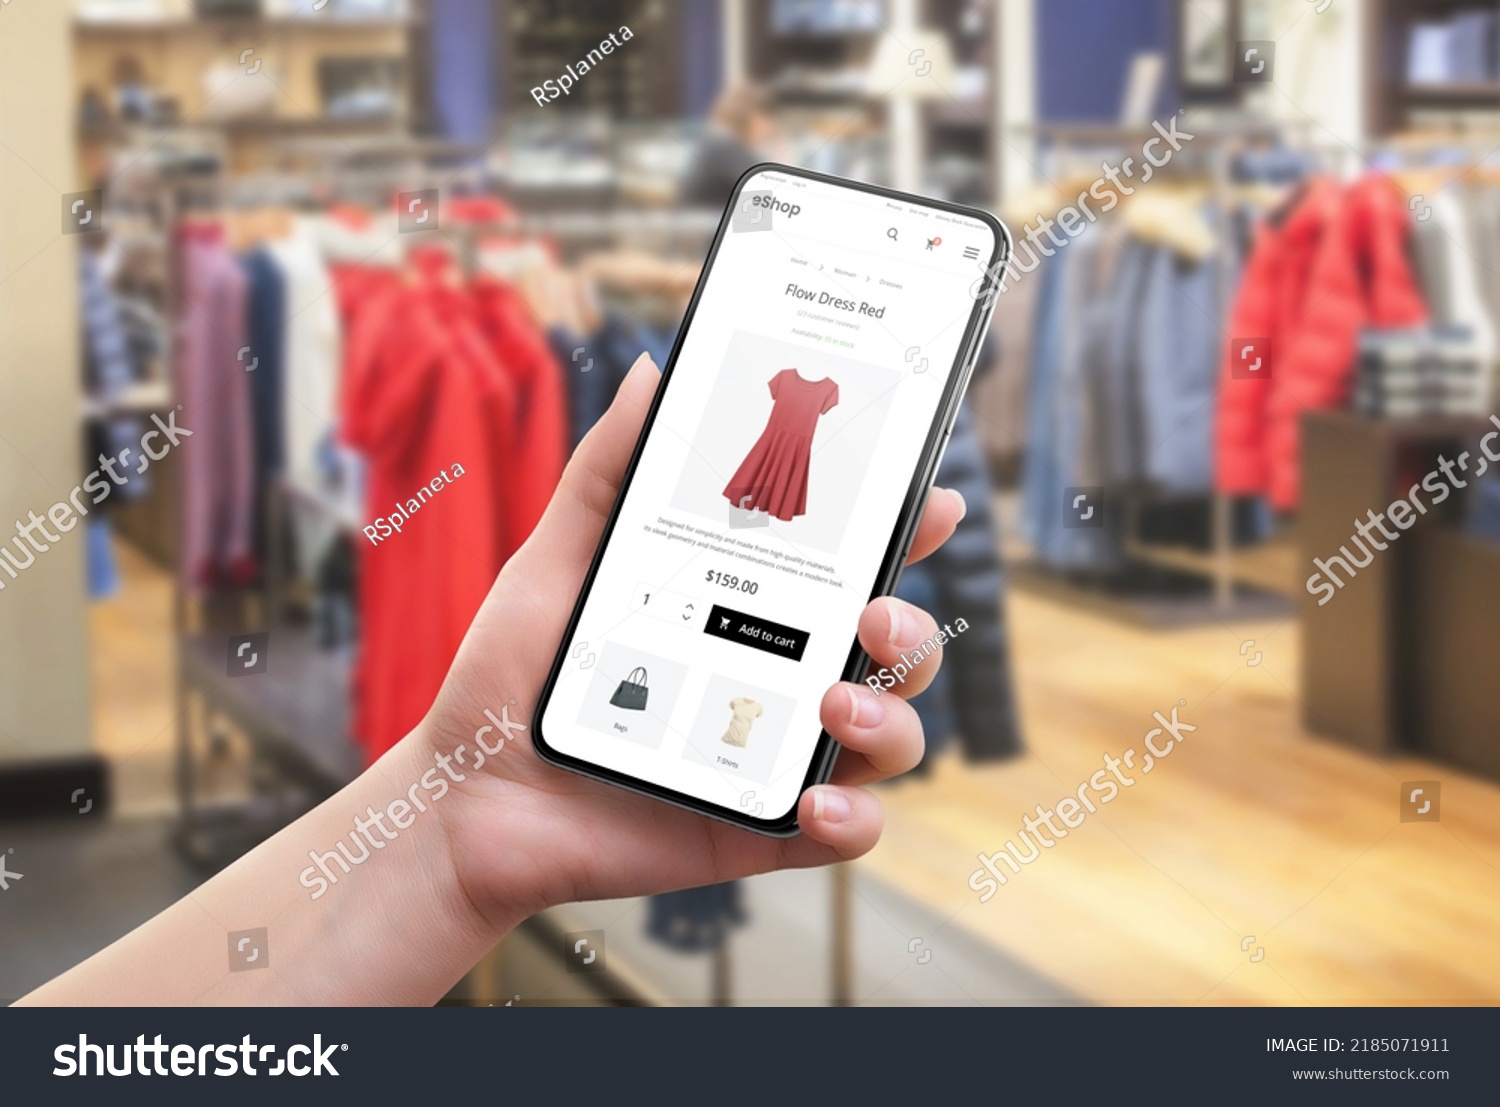 Search for clothes online in a clothing store. Color and size selection on app. Modern e-commerce website on a mobile phone in a woman's hand #2185071911